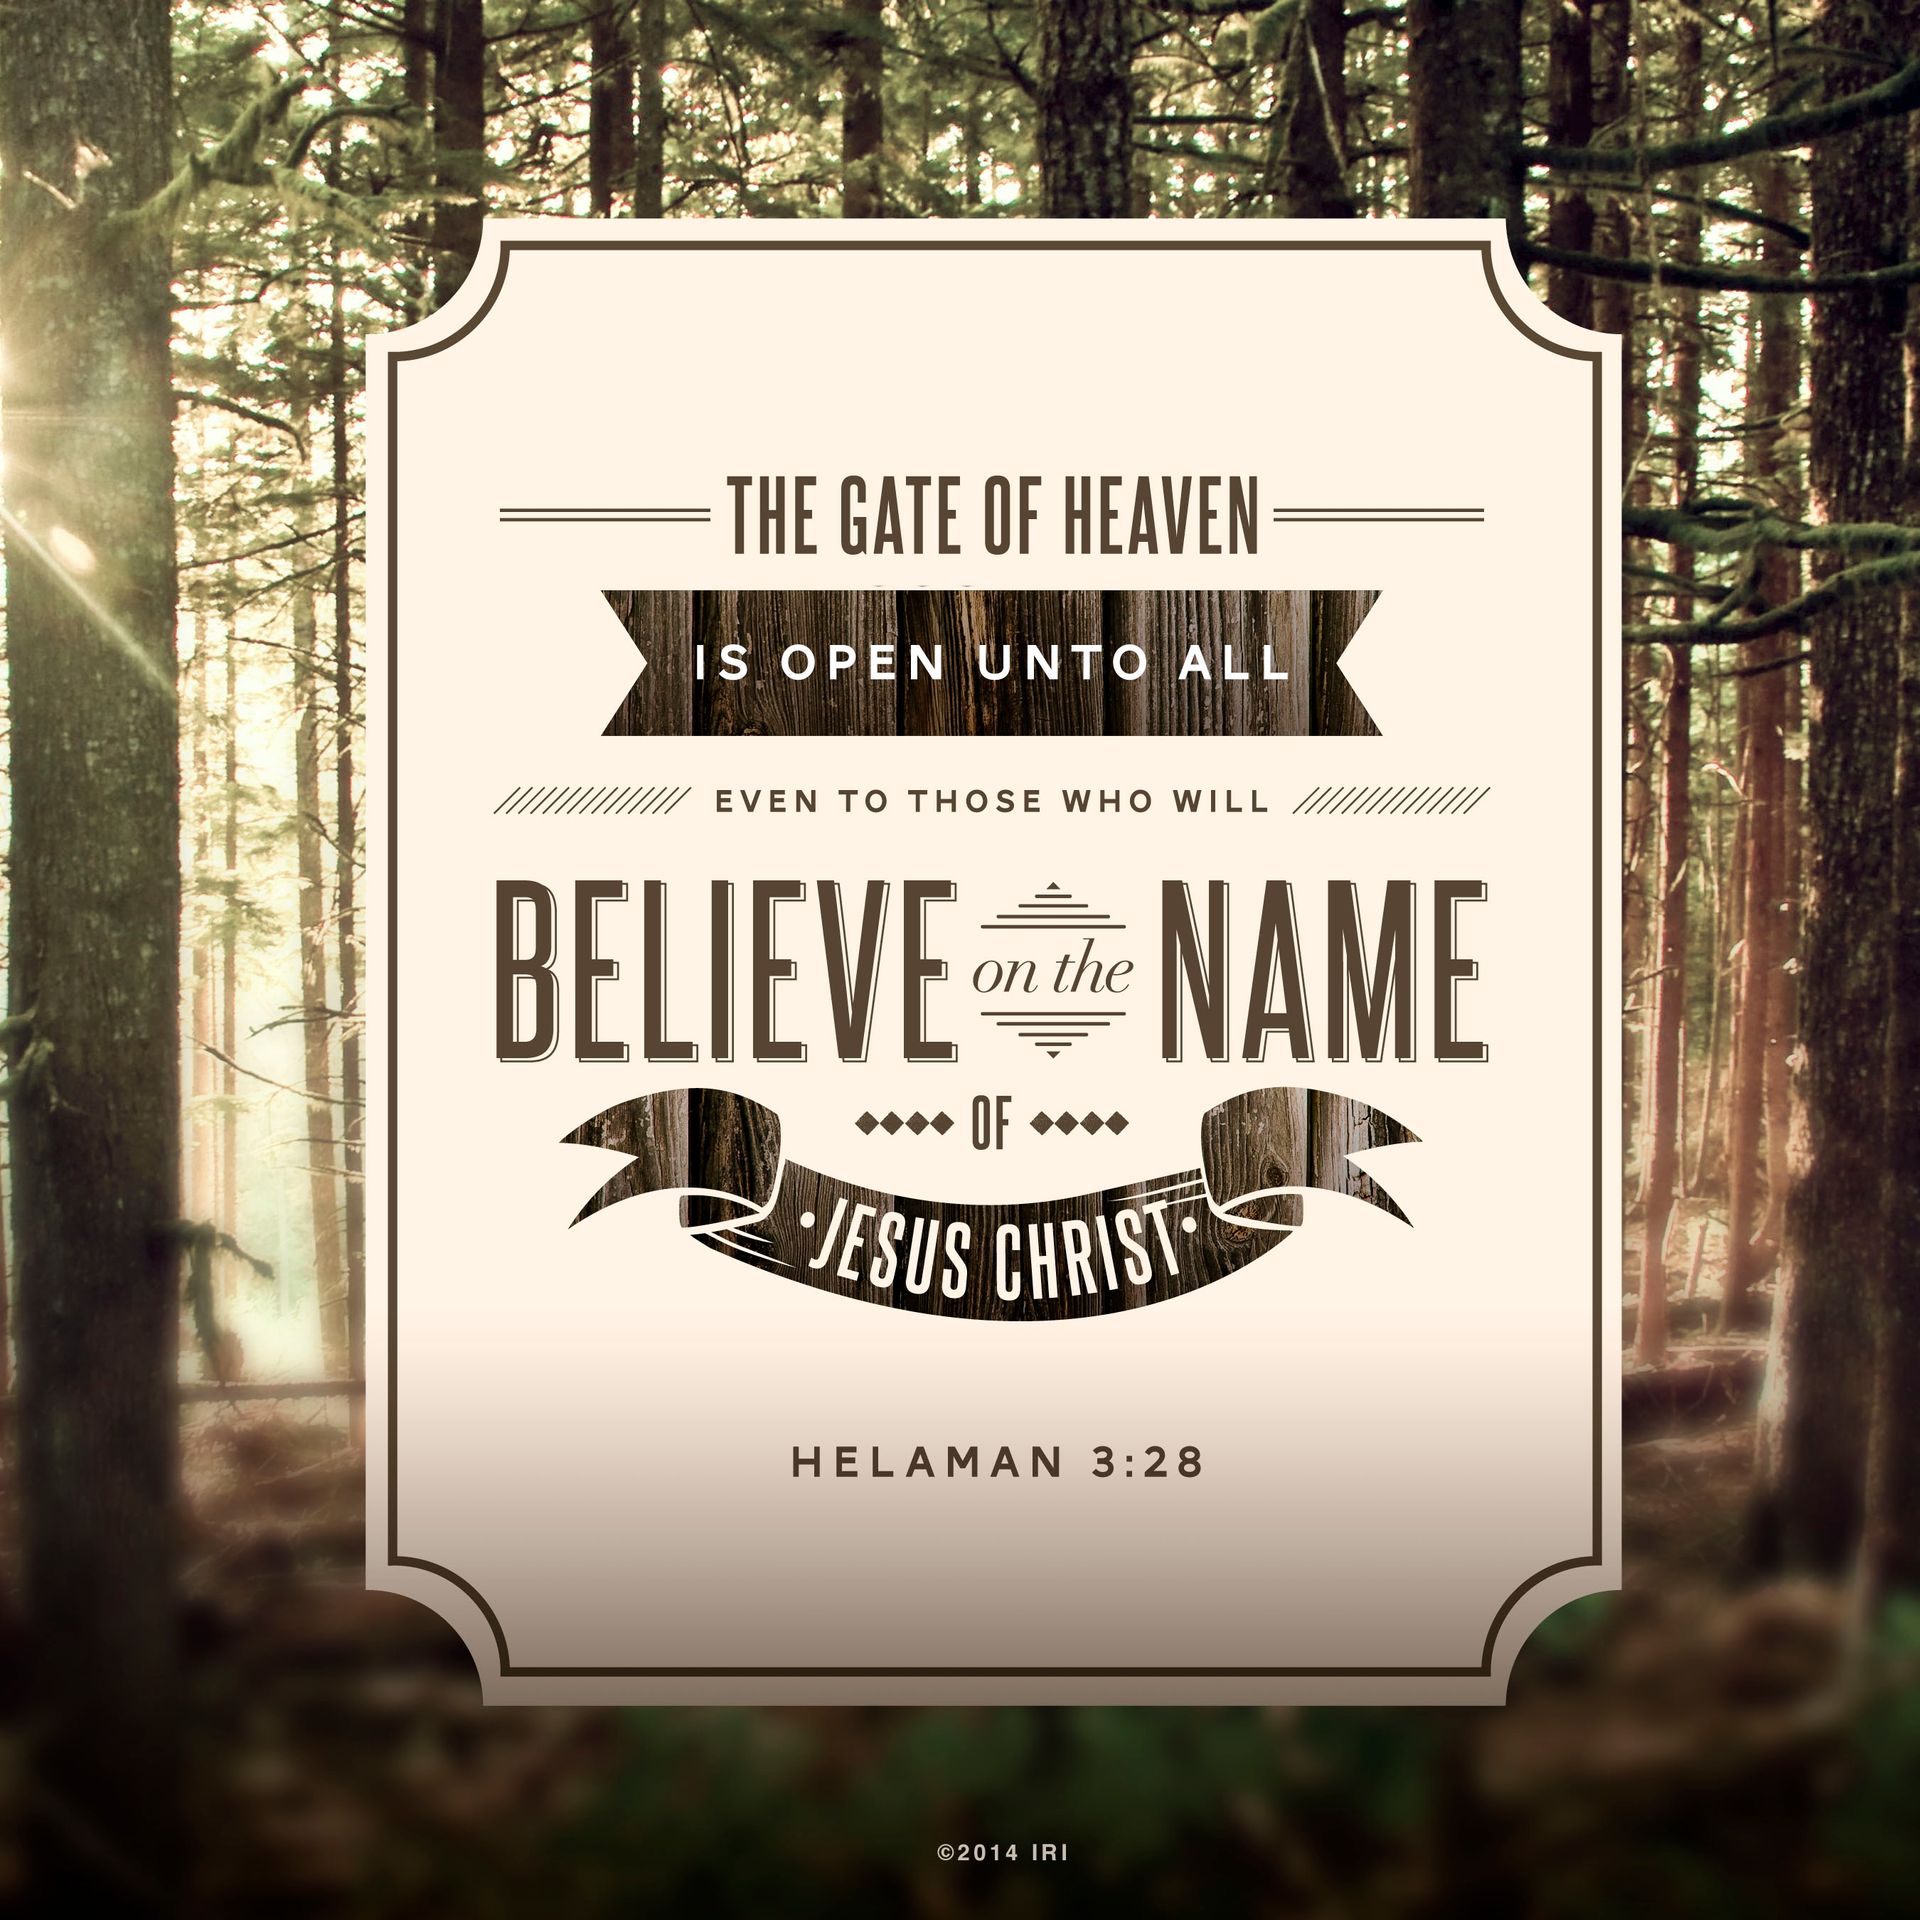 “The gate of heaven is open unto all, even to those who will believe on the name of Jesus Christ.”—Helaman 3:28  